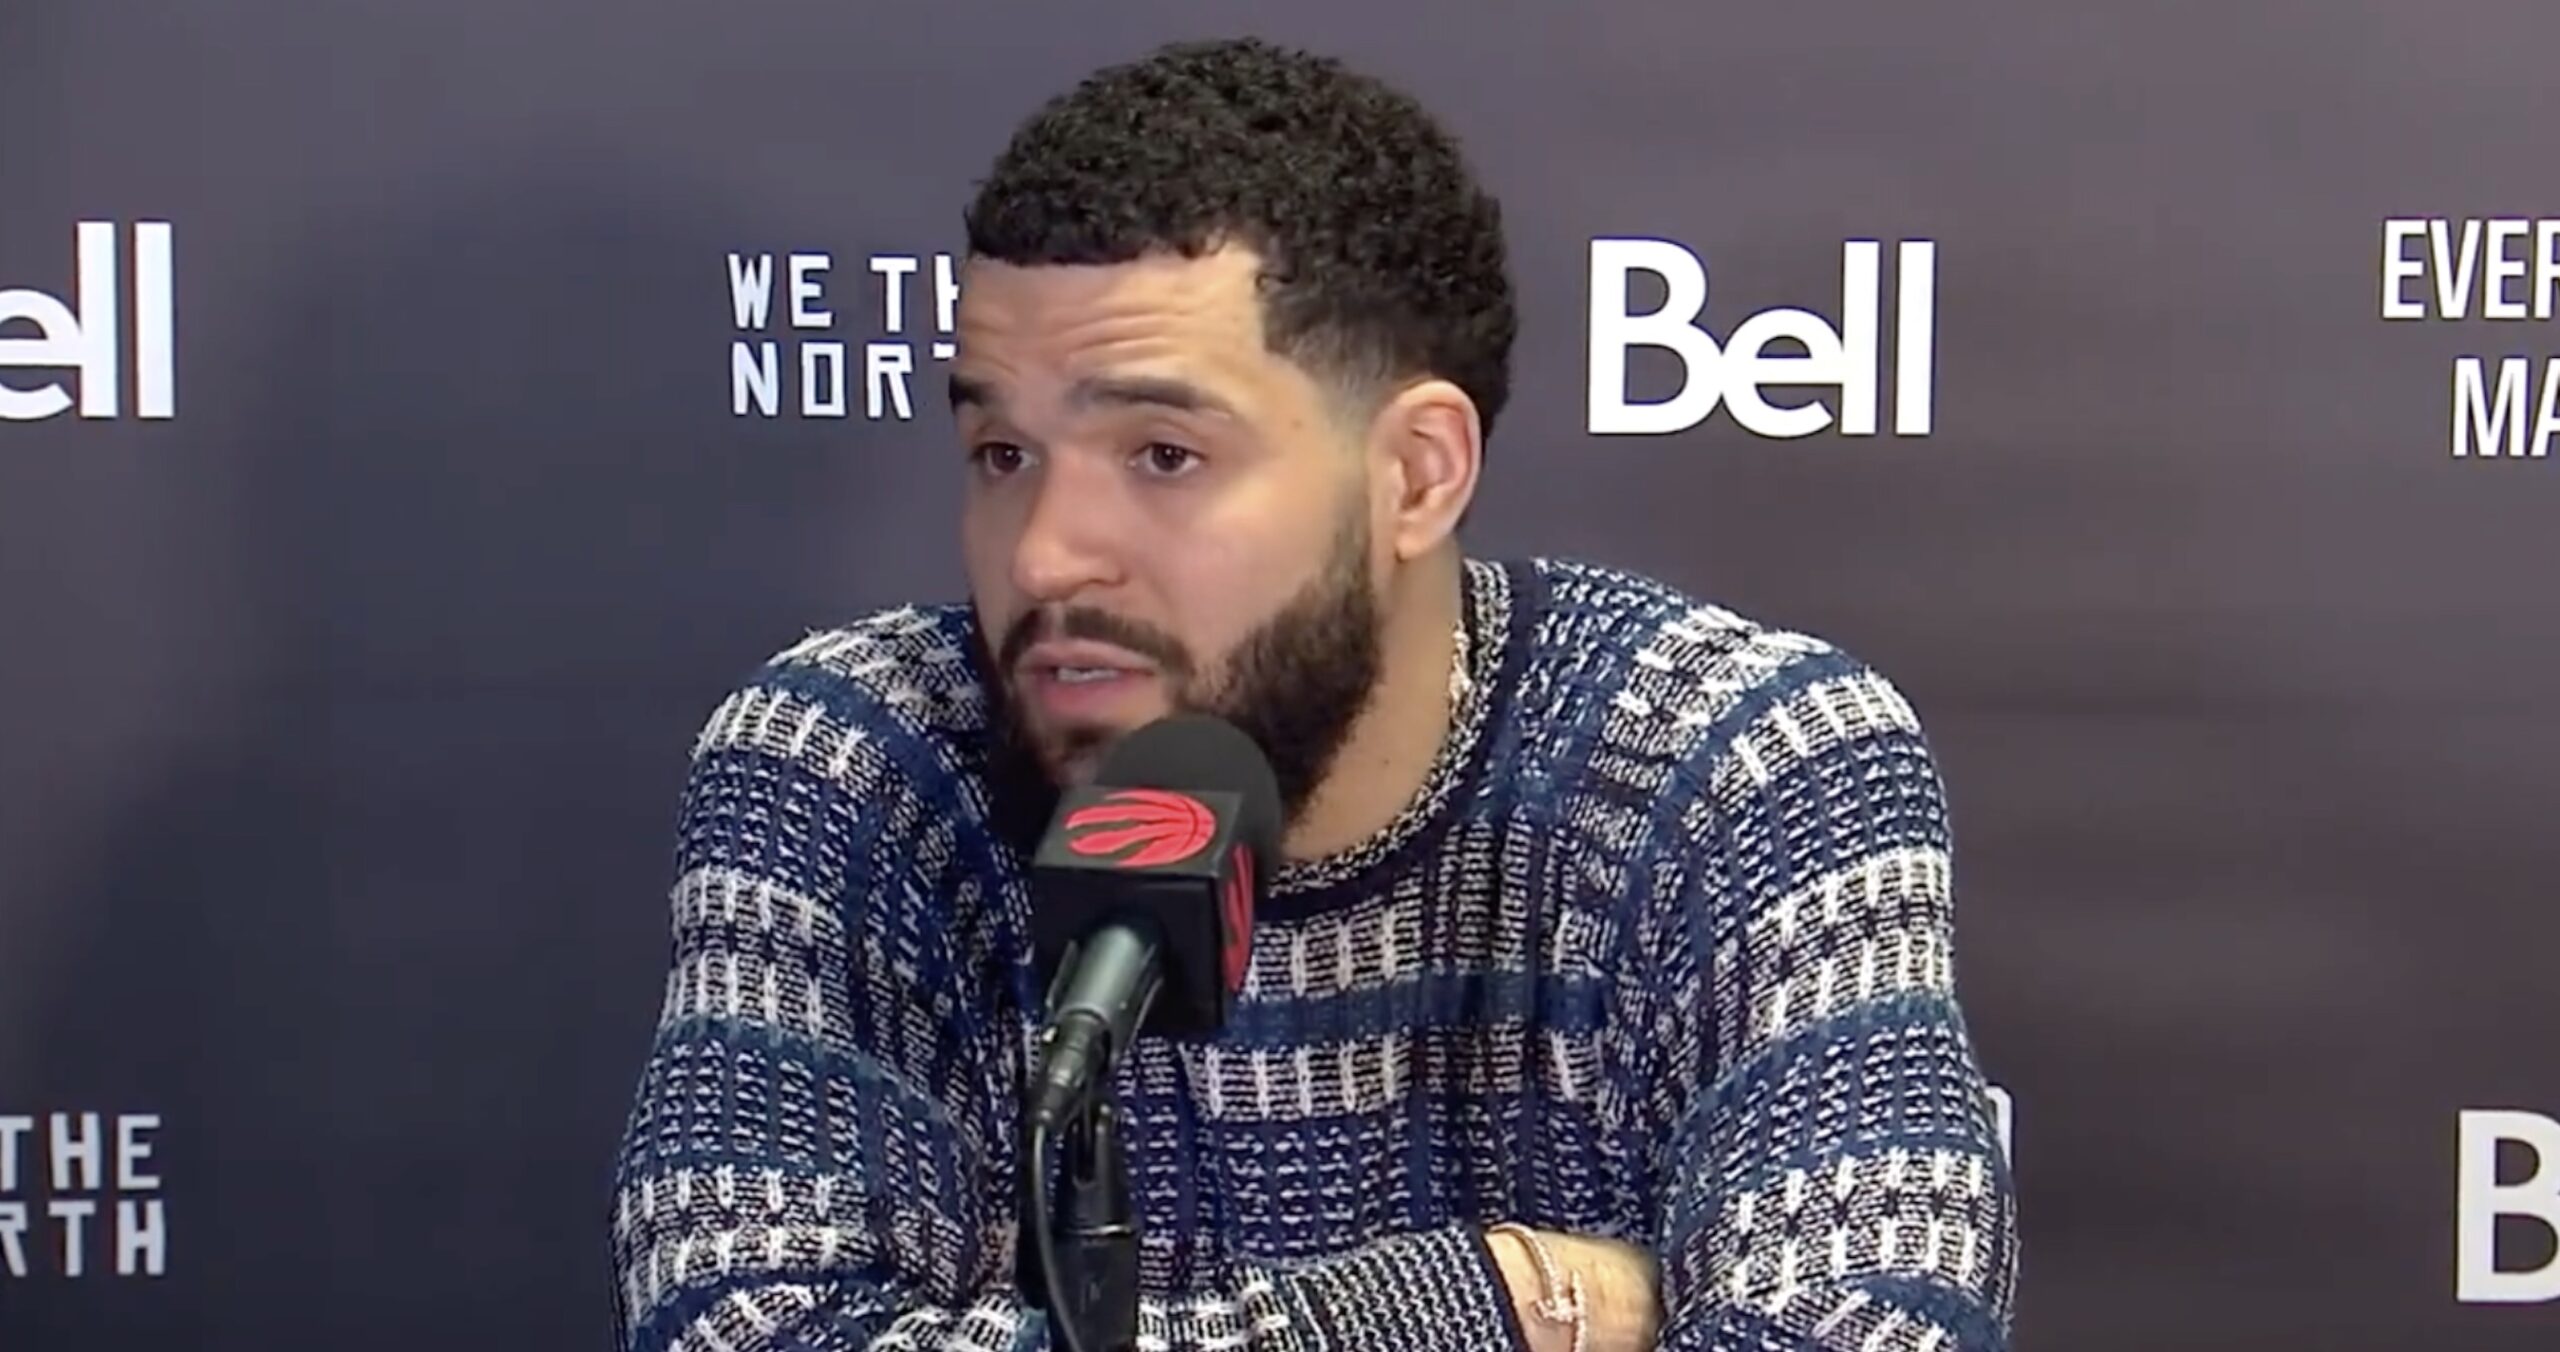 NBA May Have Quietly Punished Ref Who Sparked Fred VanVleet Tirade